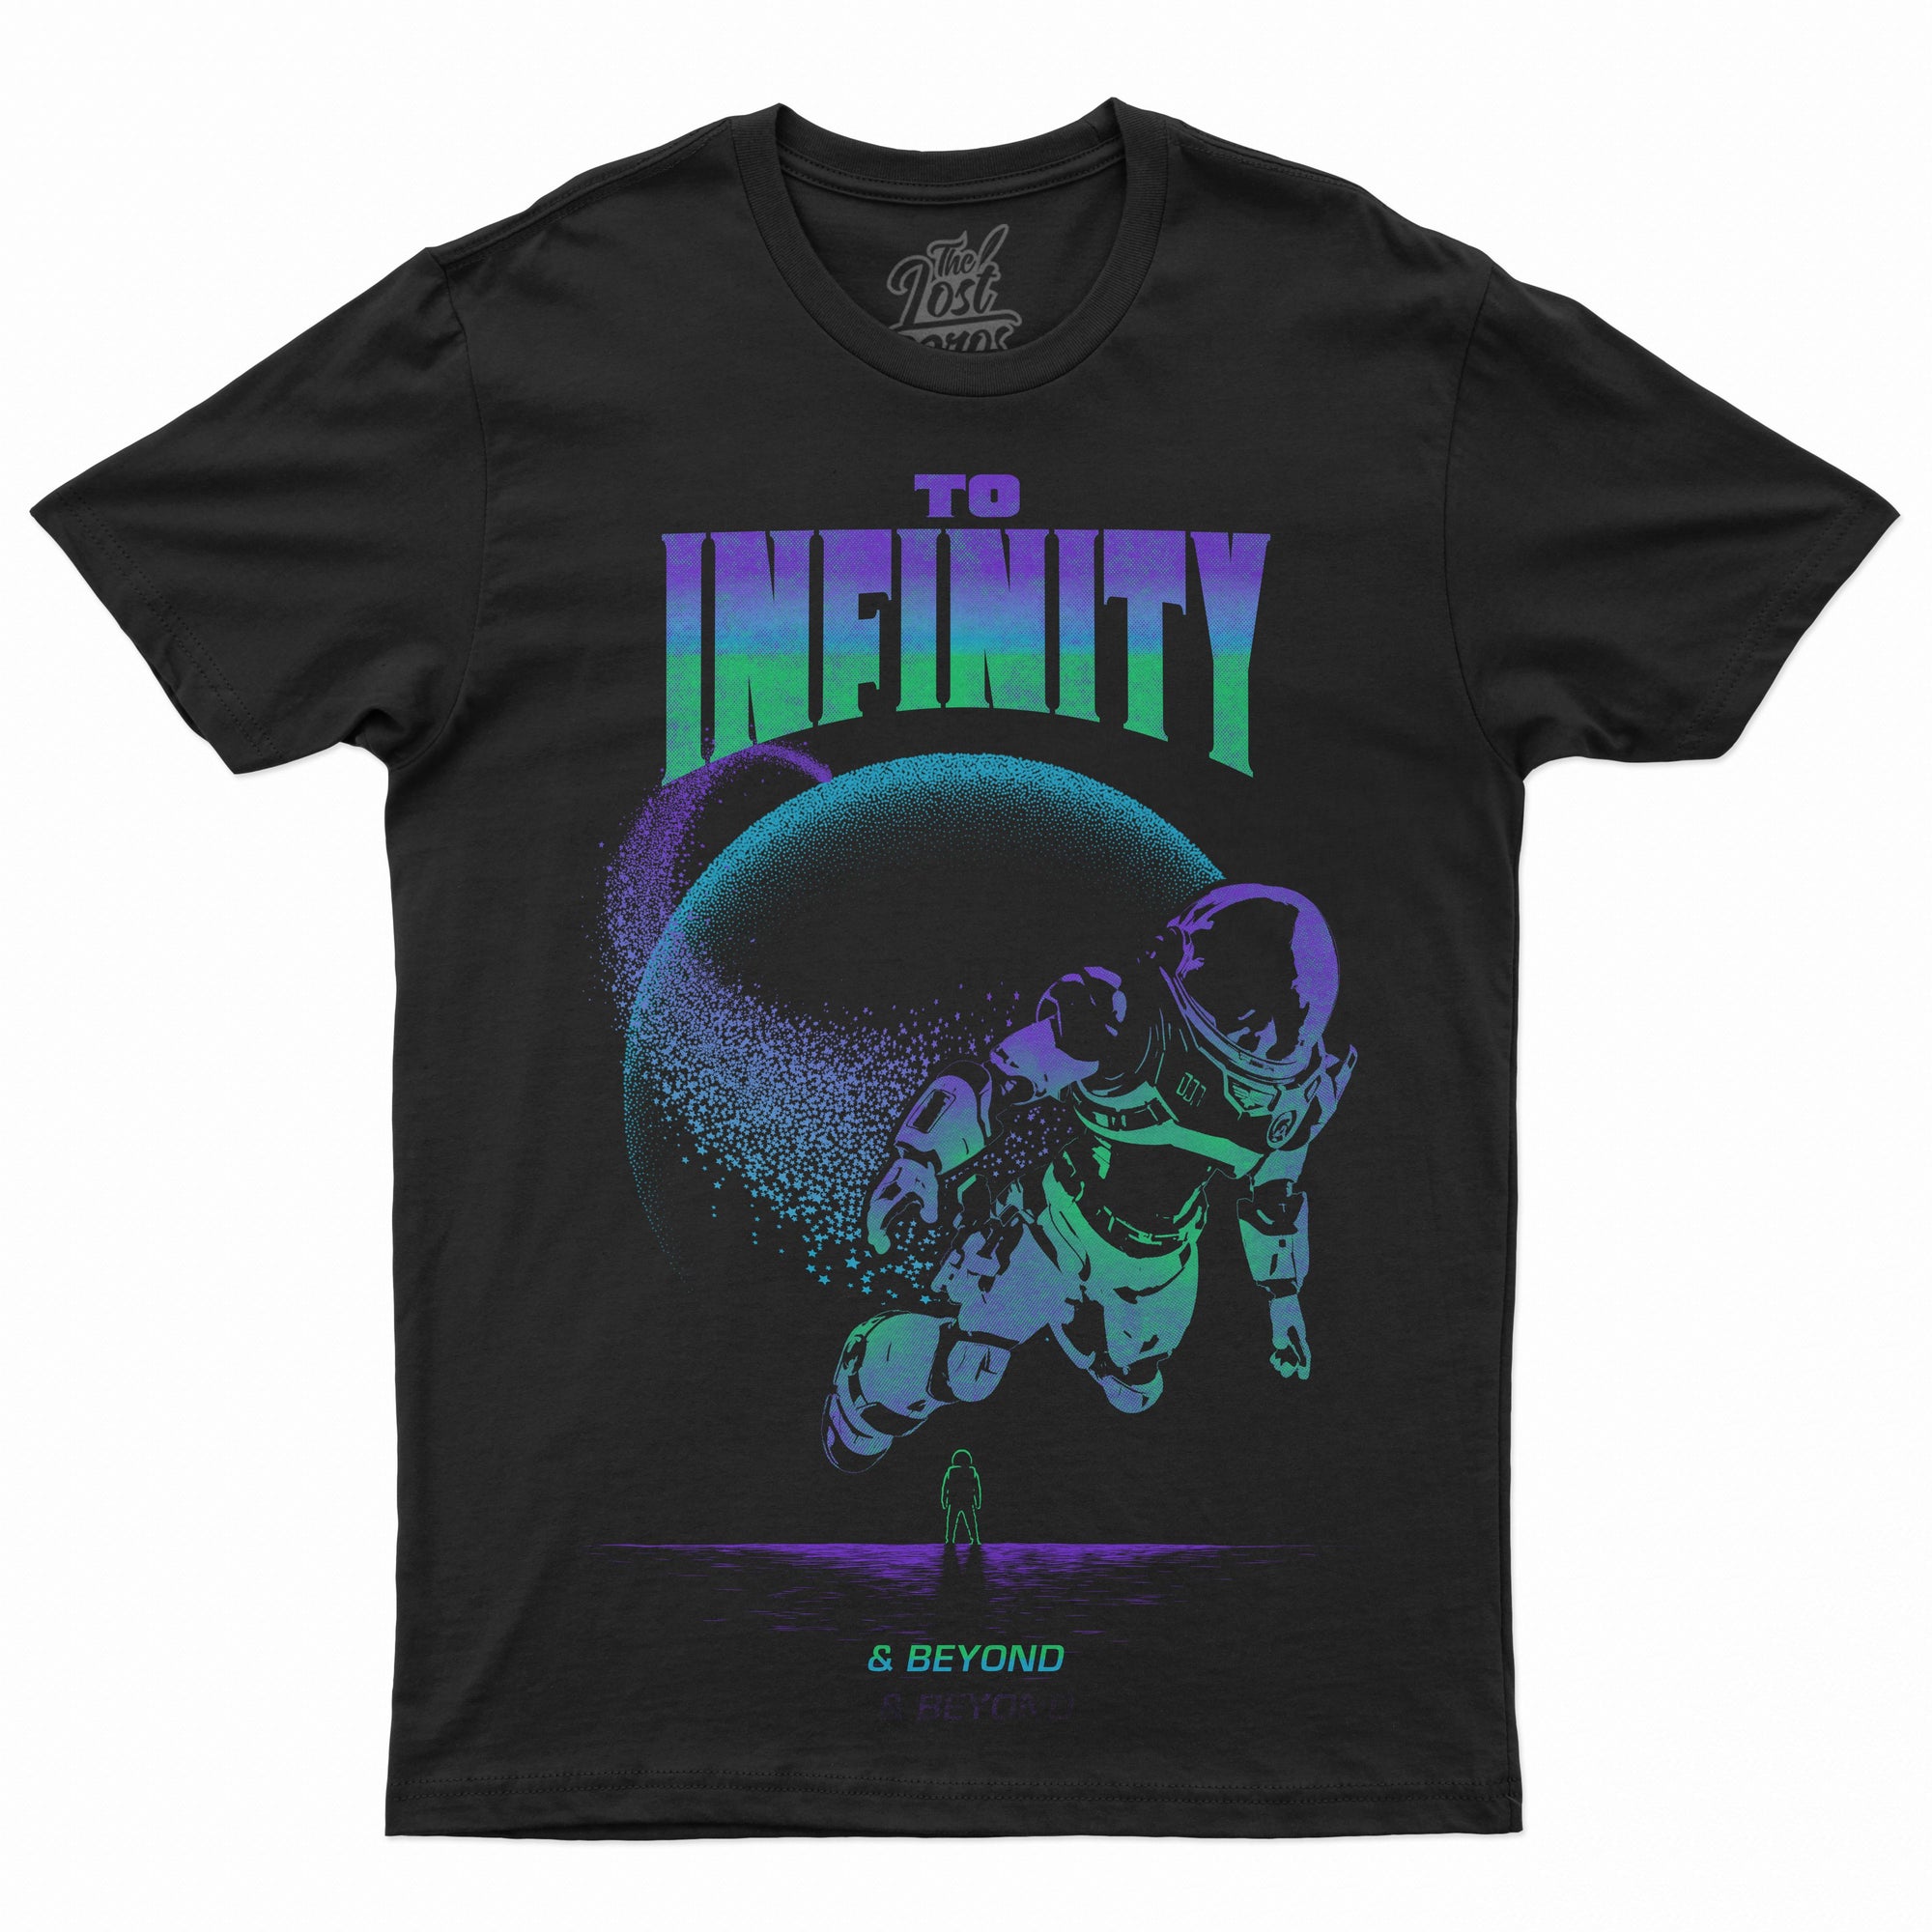 The Lost Bros To Infinity Tee